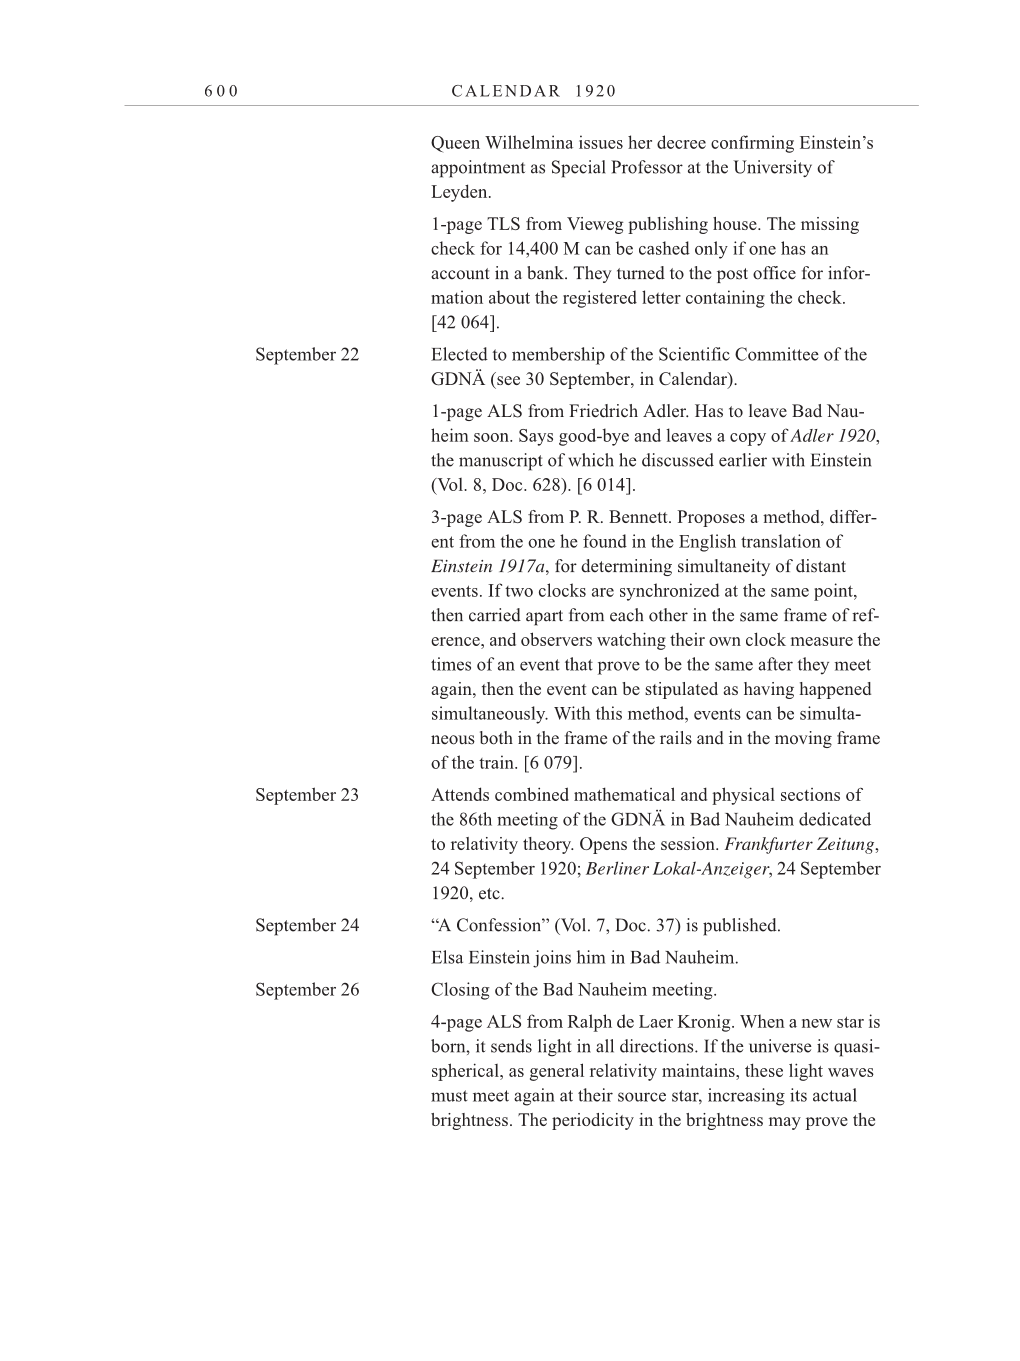 Volume 10: The Berlin Years: Correspondence May-December 1920 / Supplementary Correspondence 1909-1920 page 600